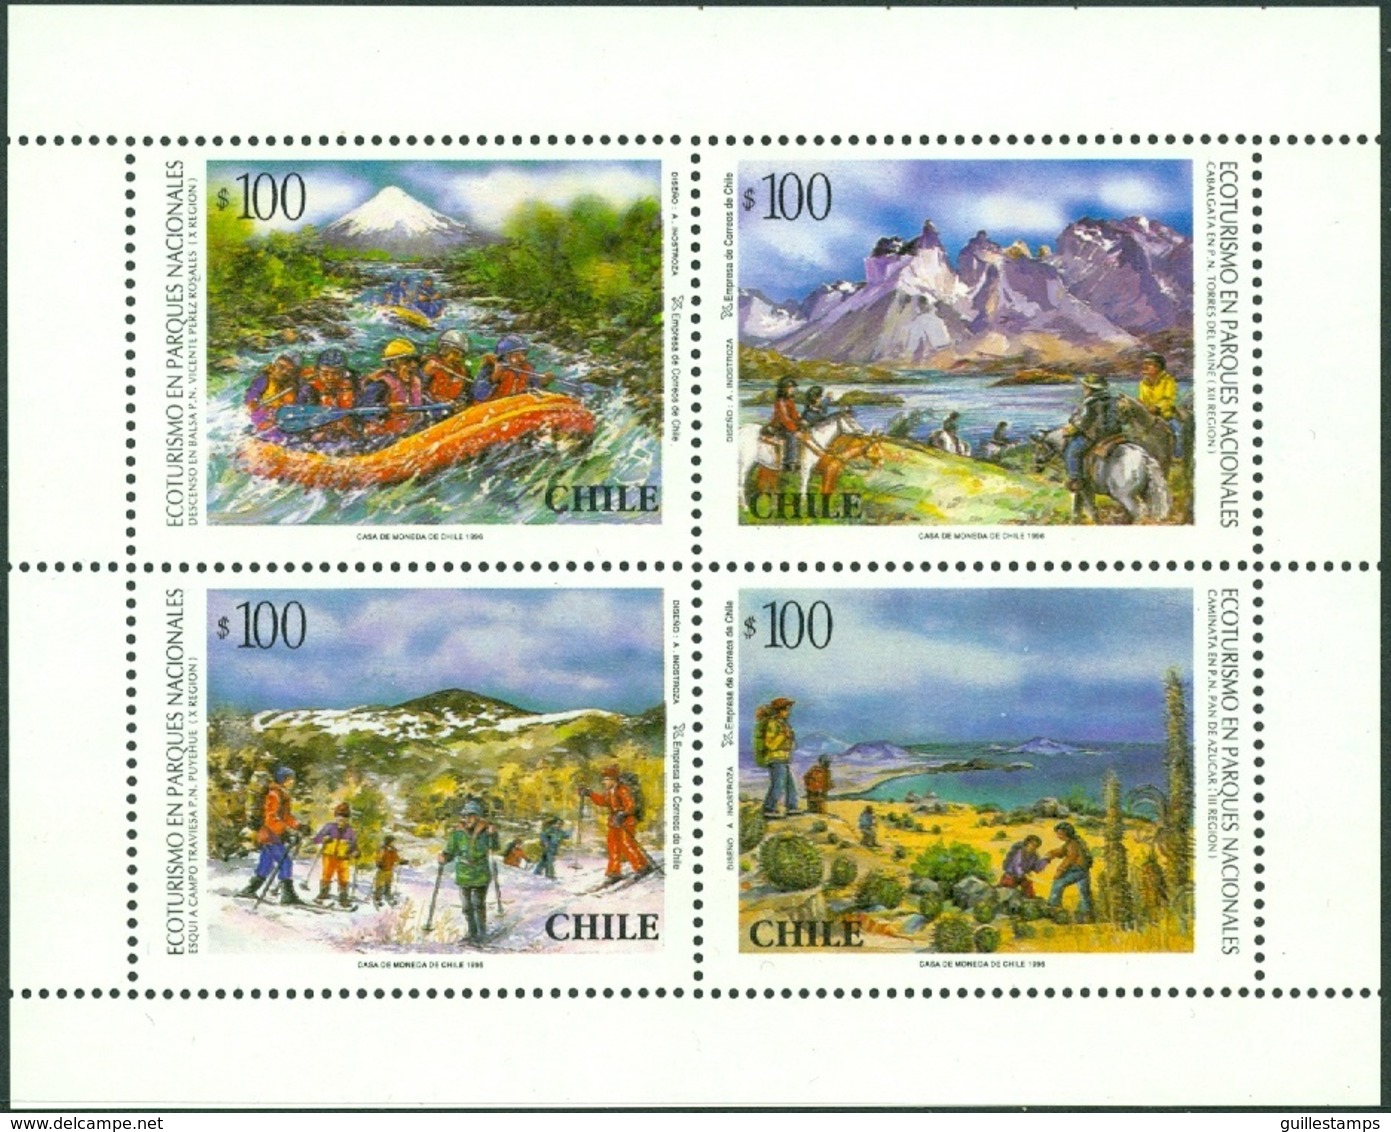 CHILE 1996 ECOTURISM IN NATIONAL PARKS SHEET OF 4** (MNH) - Chili